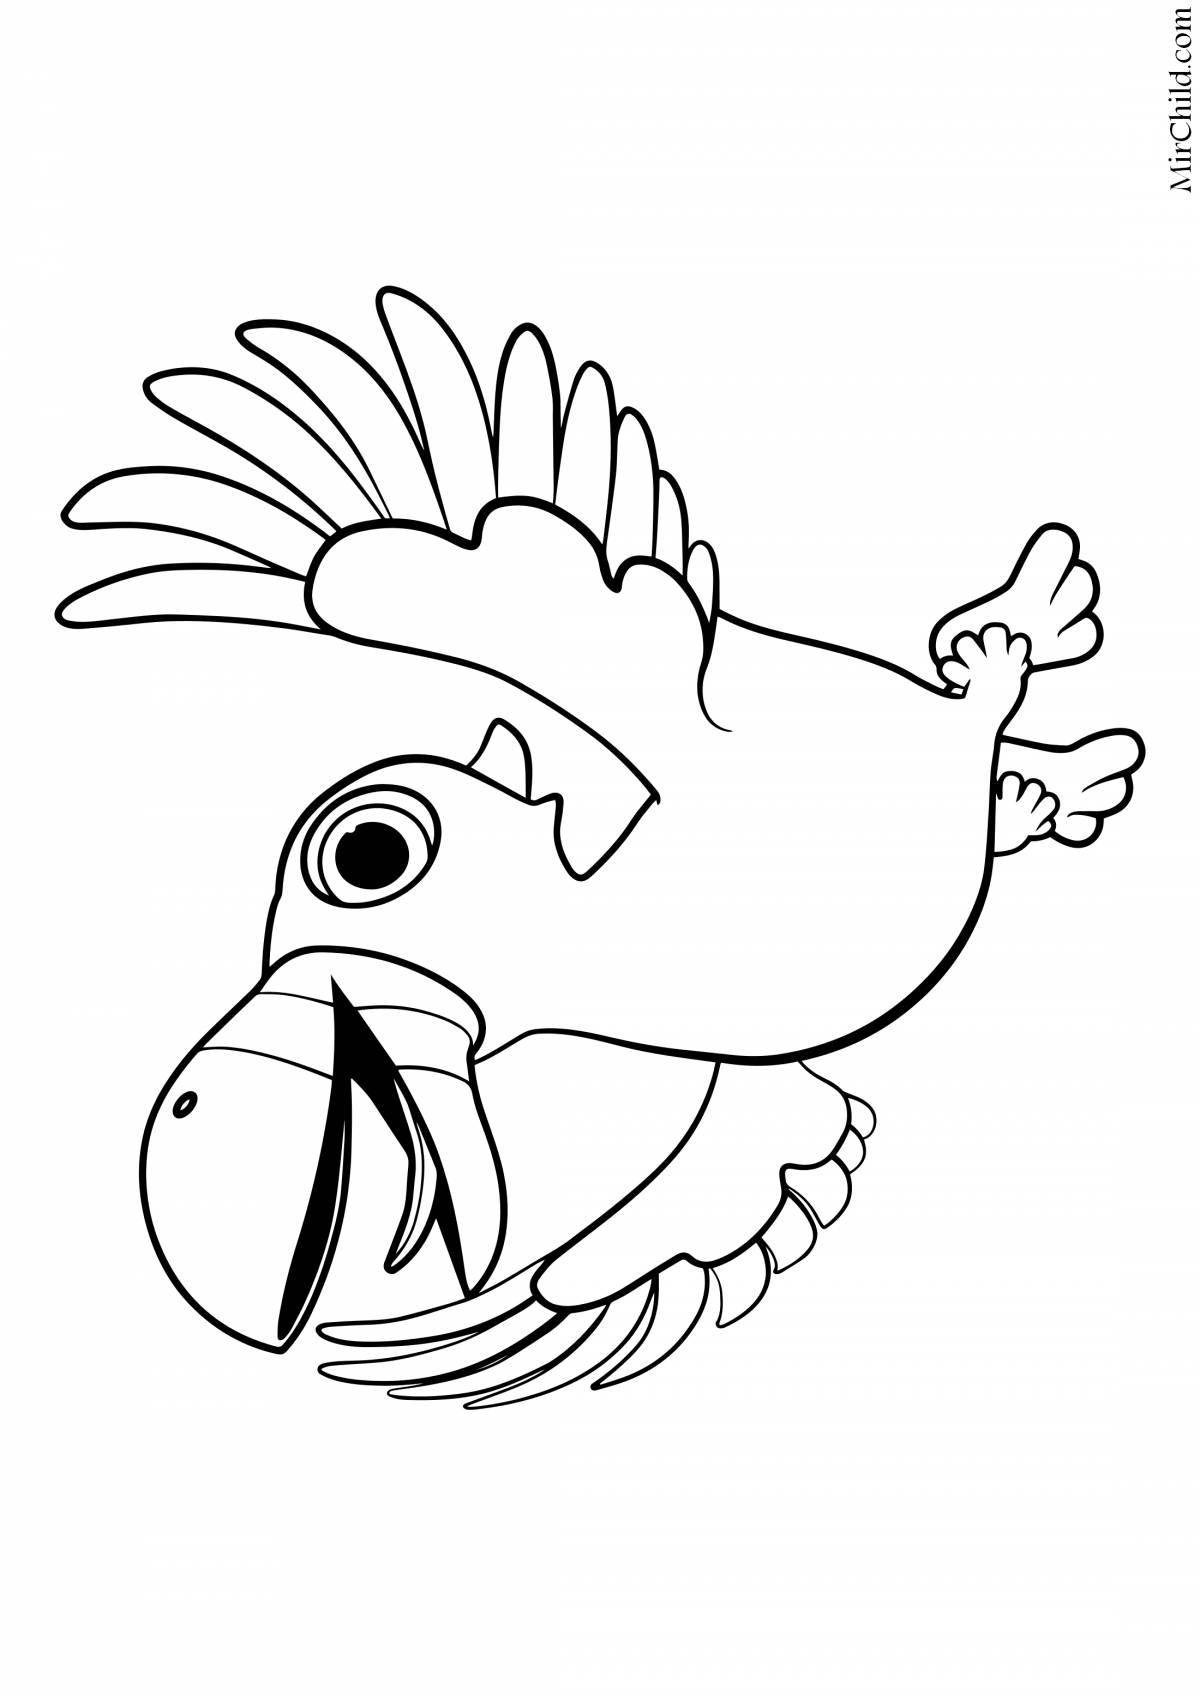 Color-frenzy coloring page otis